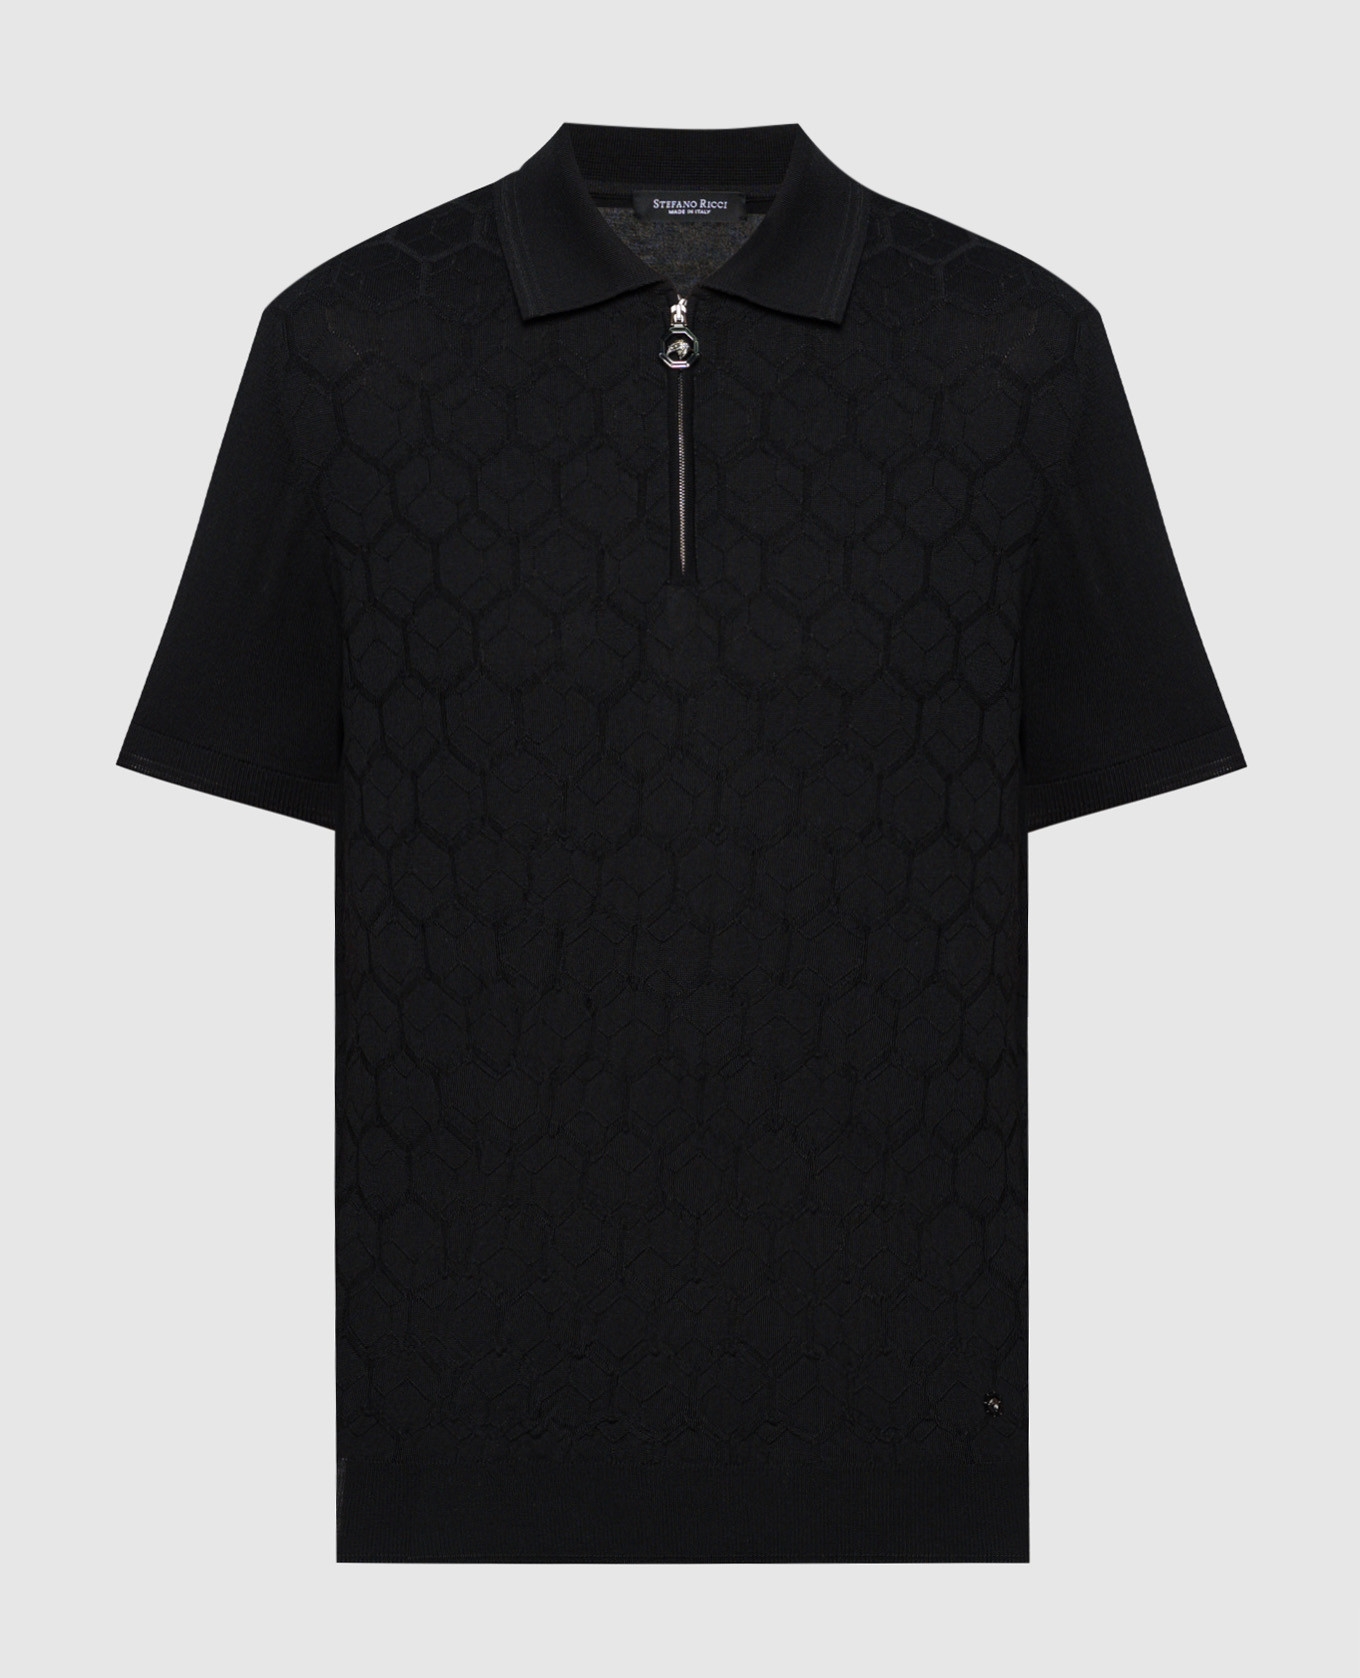 Black polo with silk in a textured pattern with a logo